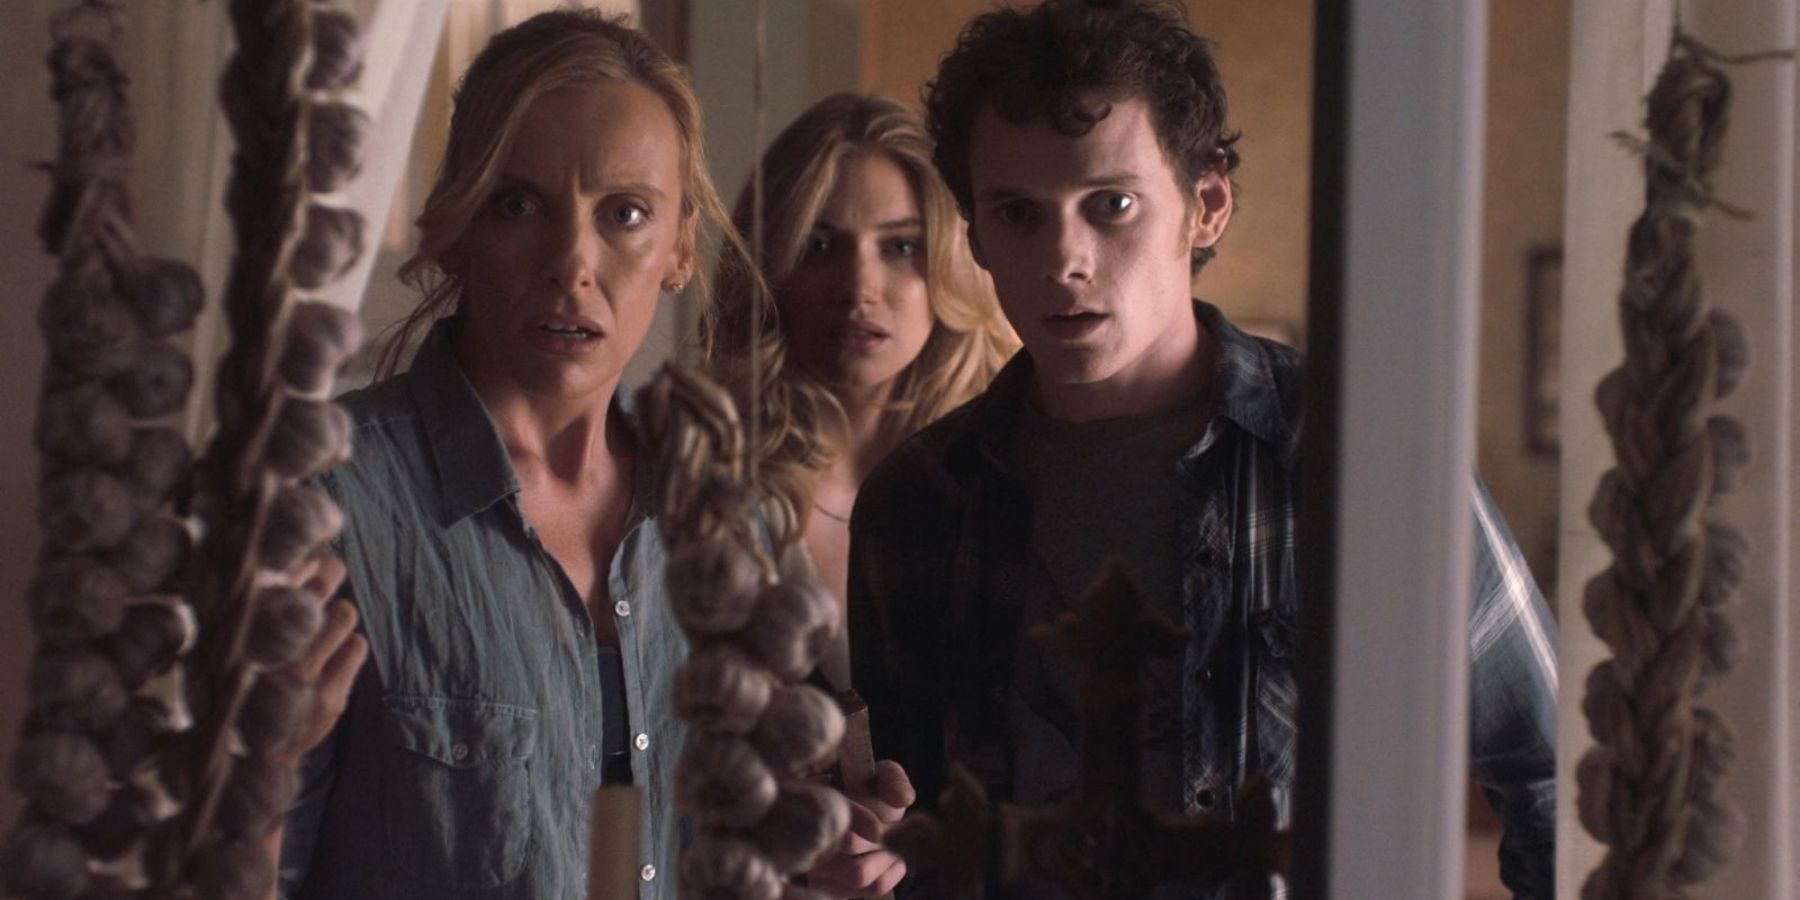 Jane (Toni Collette), Amy (Imogen Poots) and Charley (Anton Yelchin) looking scared in Fright Night (2011)